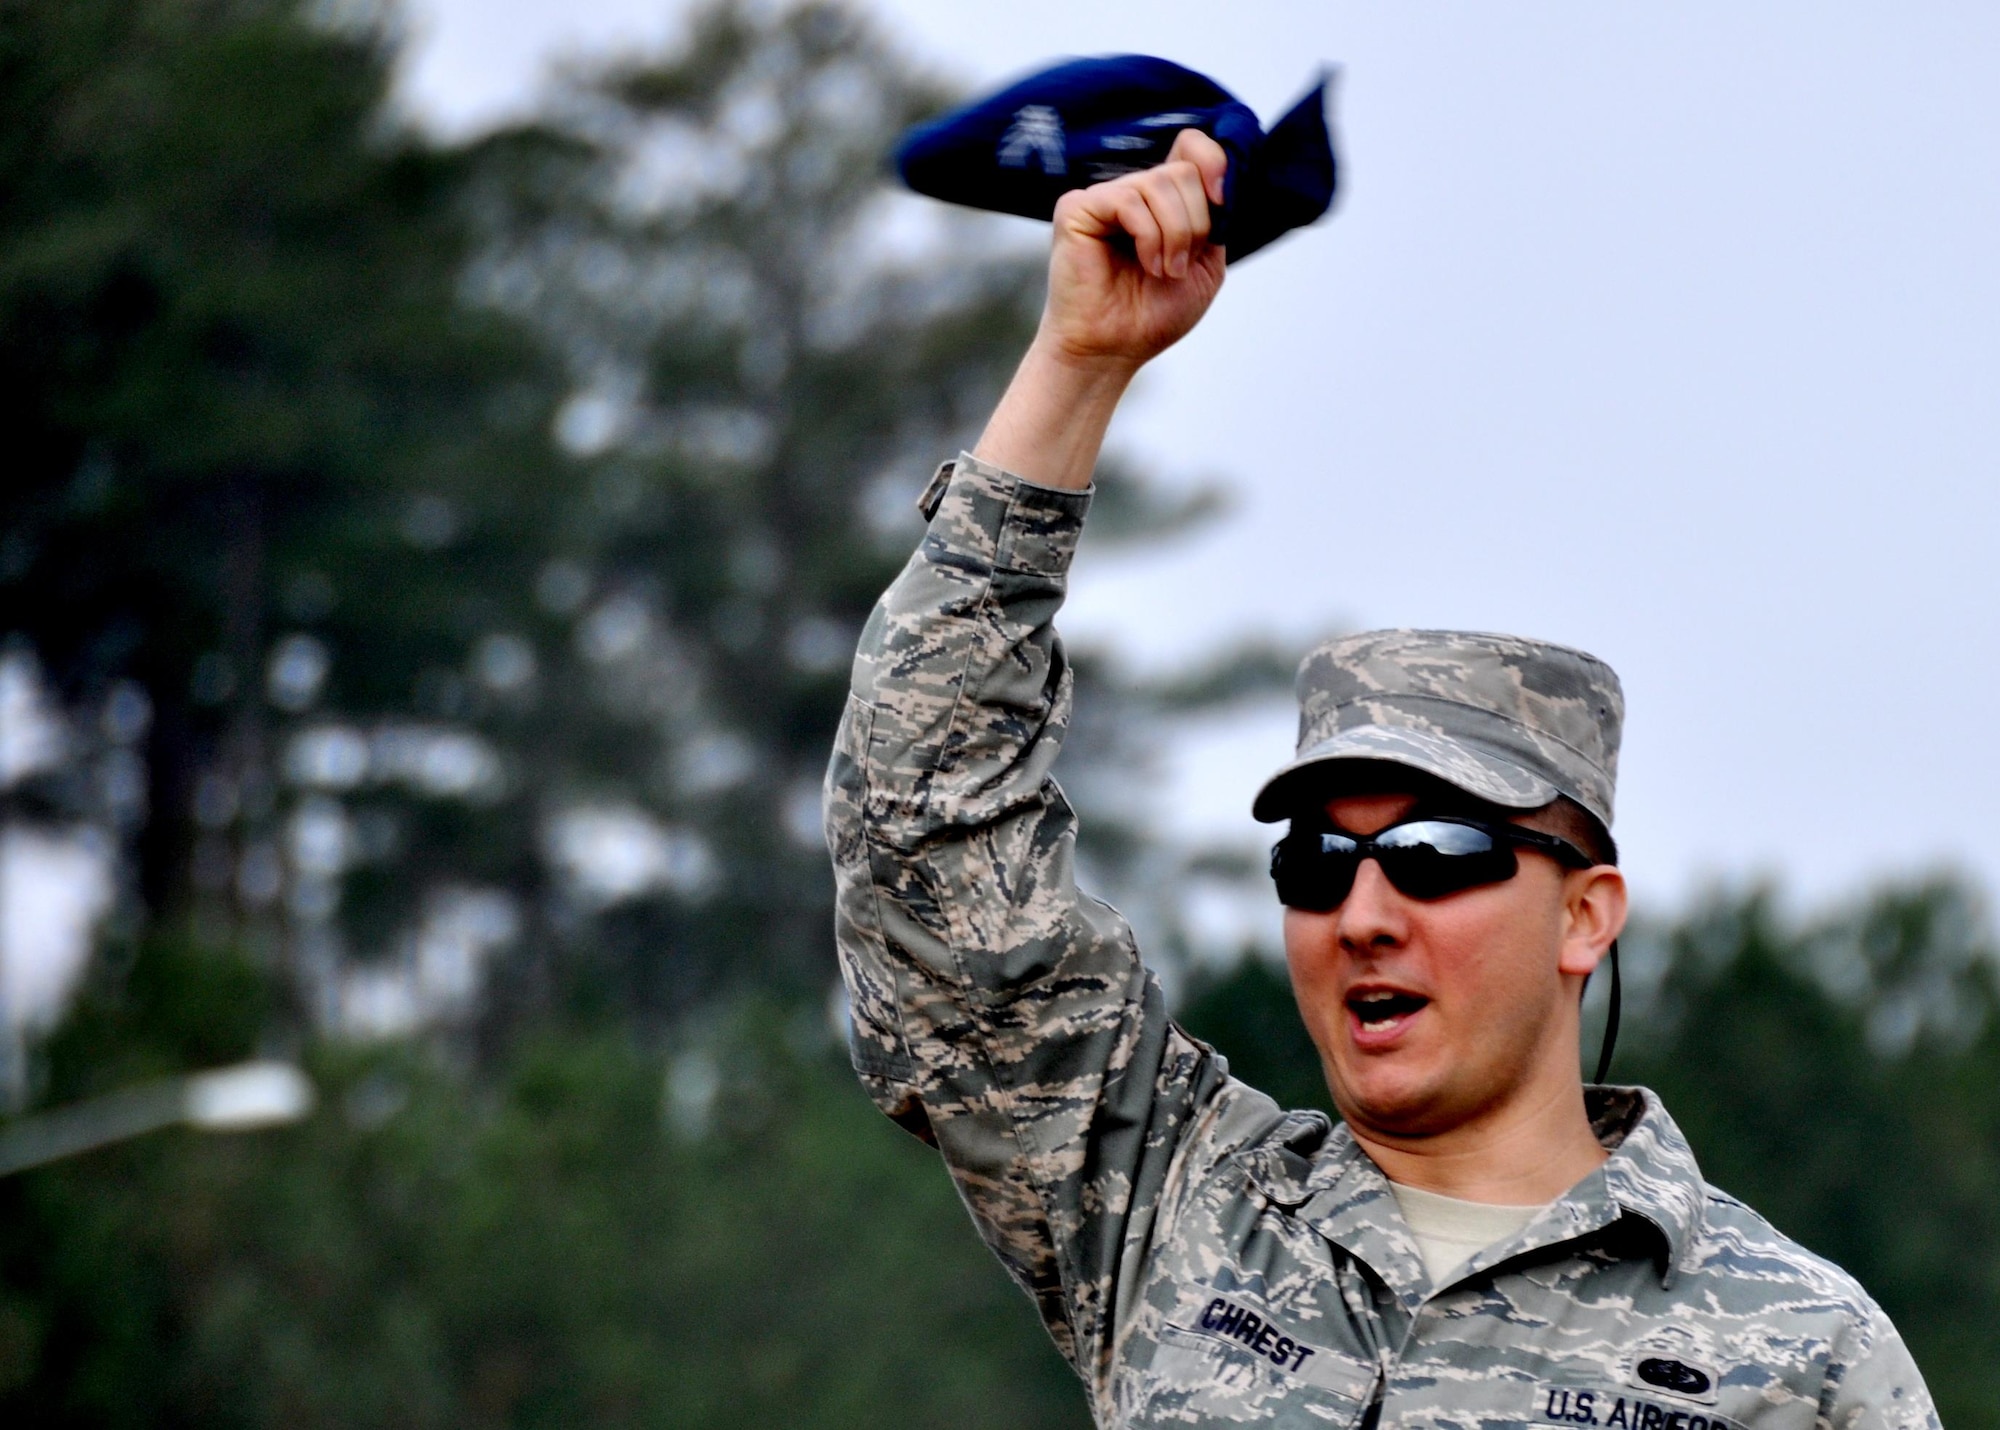 Staff Sgt. Daniel Chrest, 911th Force Support Squadron, Pittsburgh, Pa., cheers for his team mates as they compete in the forklift portion of the Readiness Challenge for Force Support Silver Flag at Dobbins Air Reserve Base, Georgia, March 11, 2015. The challenge consisted of teams competing against each other in nine different events ranging from following a convoy, building tents, fixing Babington burners, cooking meals, planning lodging, planning a base from scratch, driving a forklift and a scavenger hunt. (U.S. Air Force photo/Senior Airman Daniel Phelps)